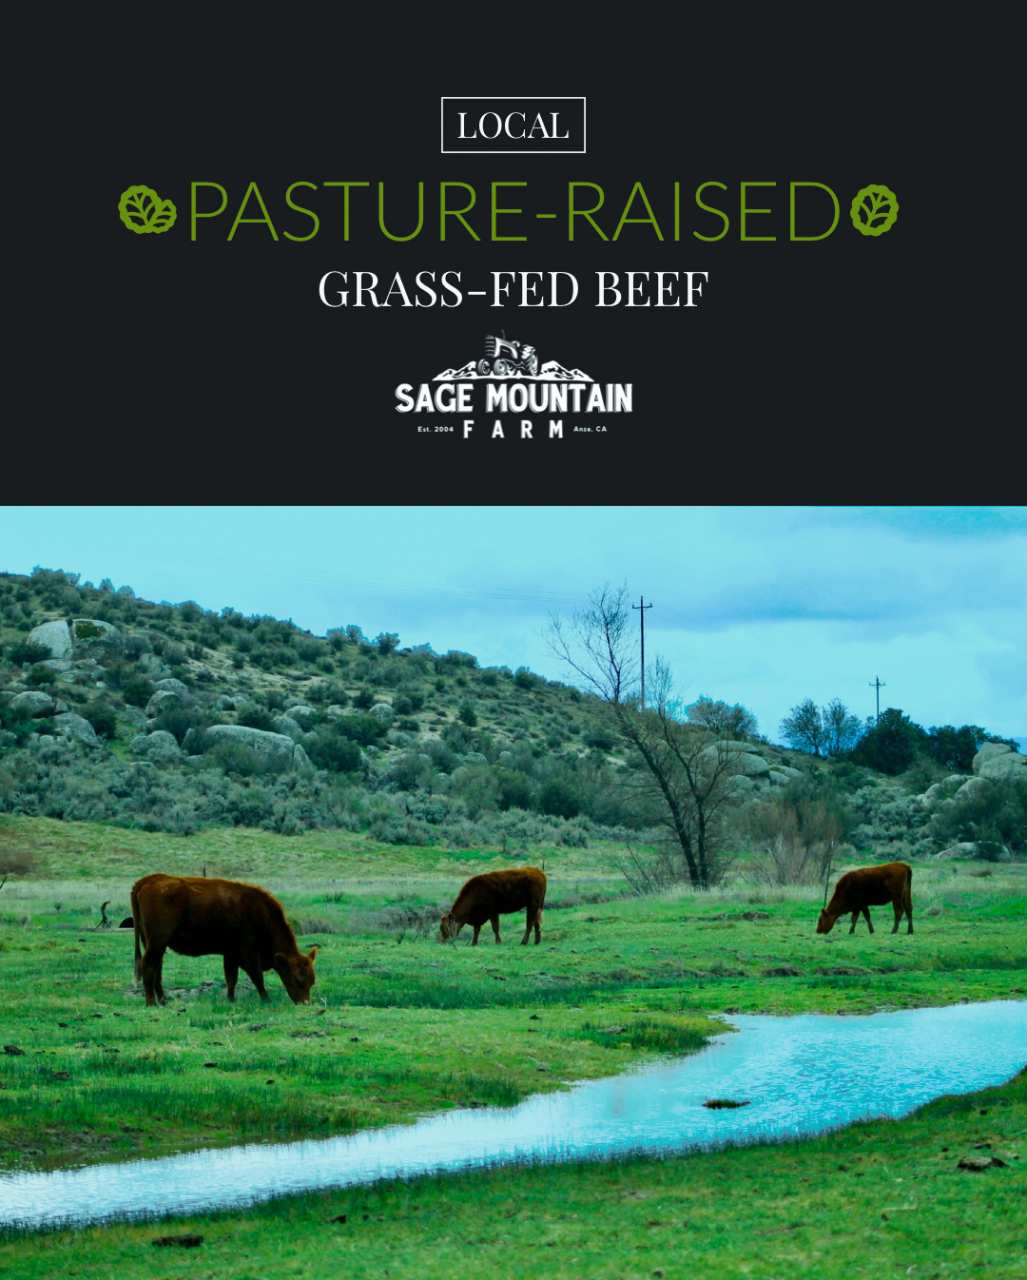 Grazing Grass-fed Grass-finished cattle at Sage Mountain Farm in Anza, CA